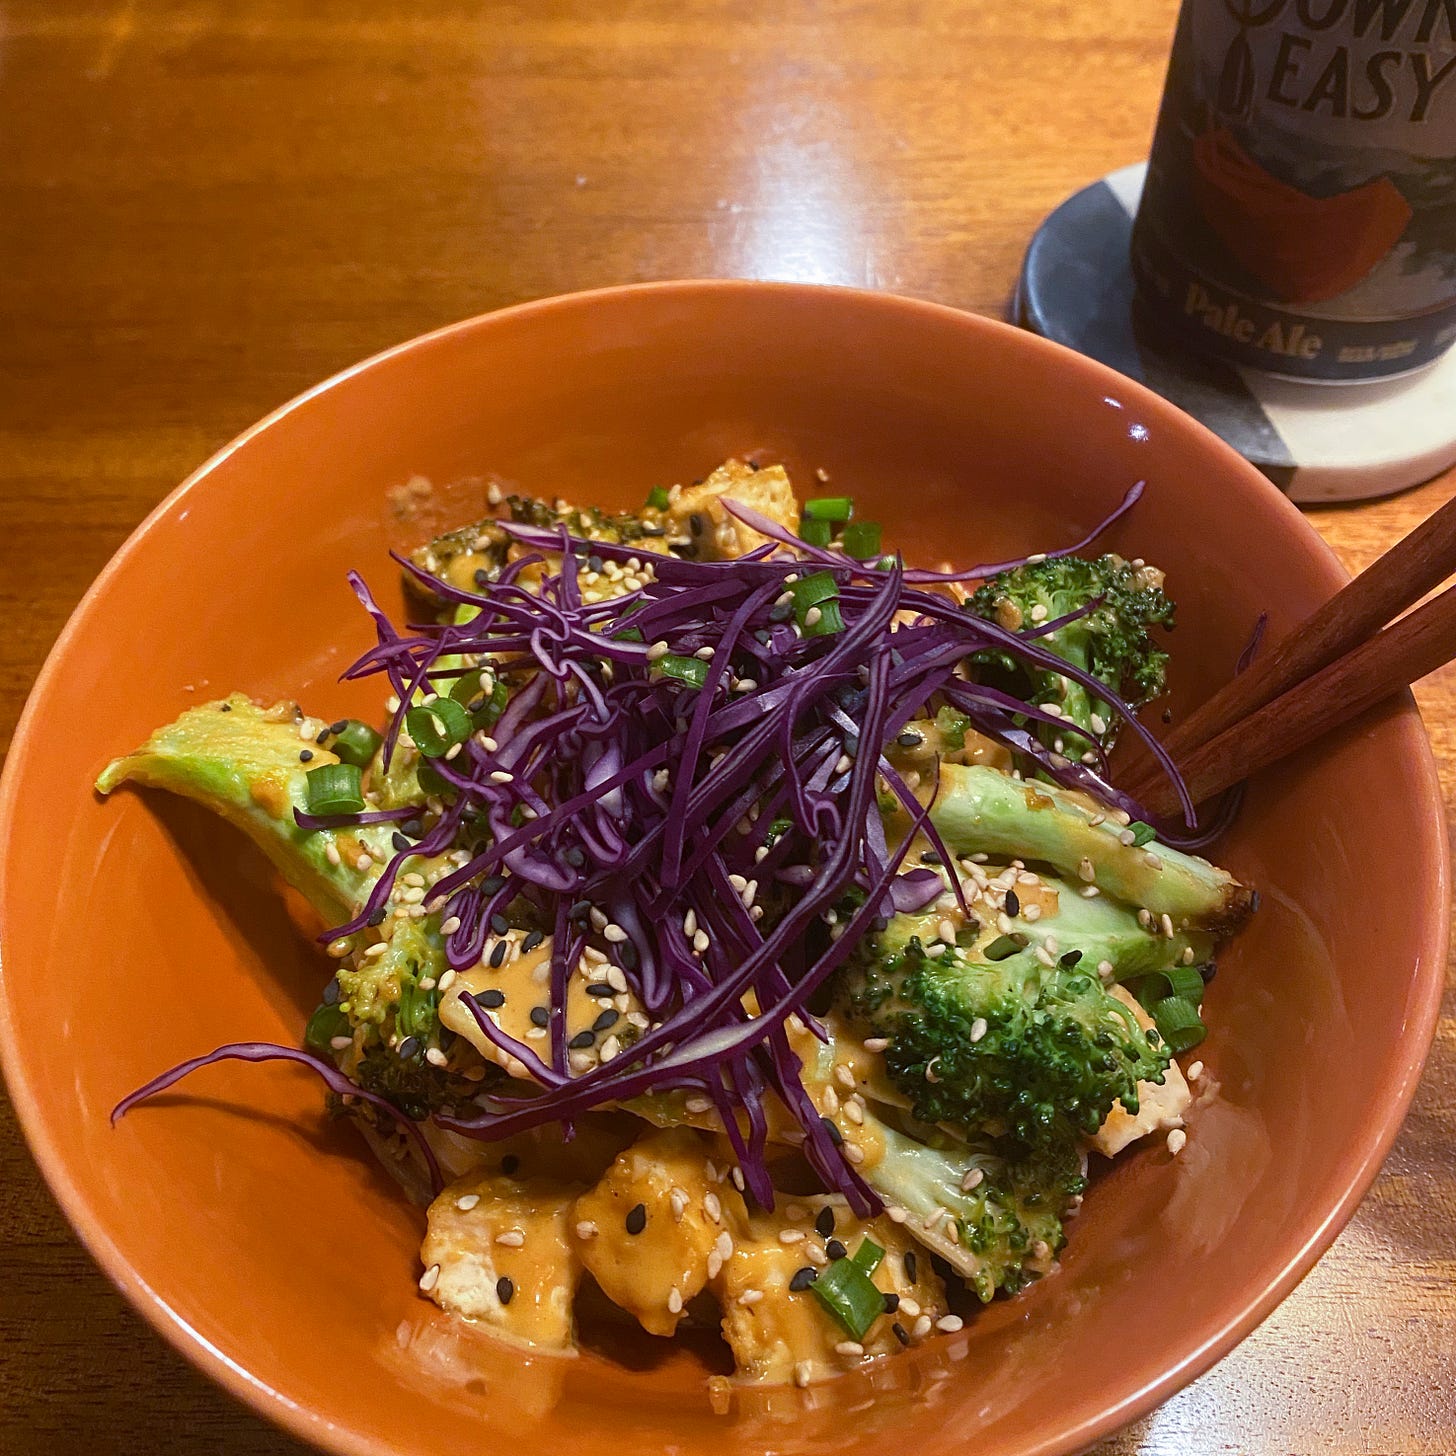 In an orange bowl with chopsticks at the edge are rice noodles, tofu, and broccoli tossed in peanut sauce. On top is a little pile of thinly sliced red cabbage, and a sprinkling of toasted white and black sesame seeds.